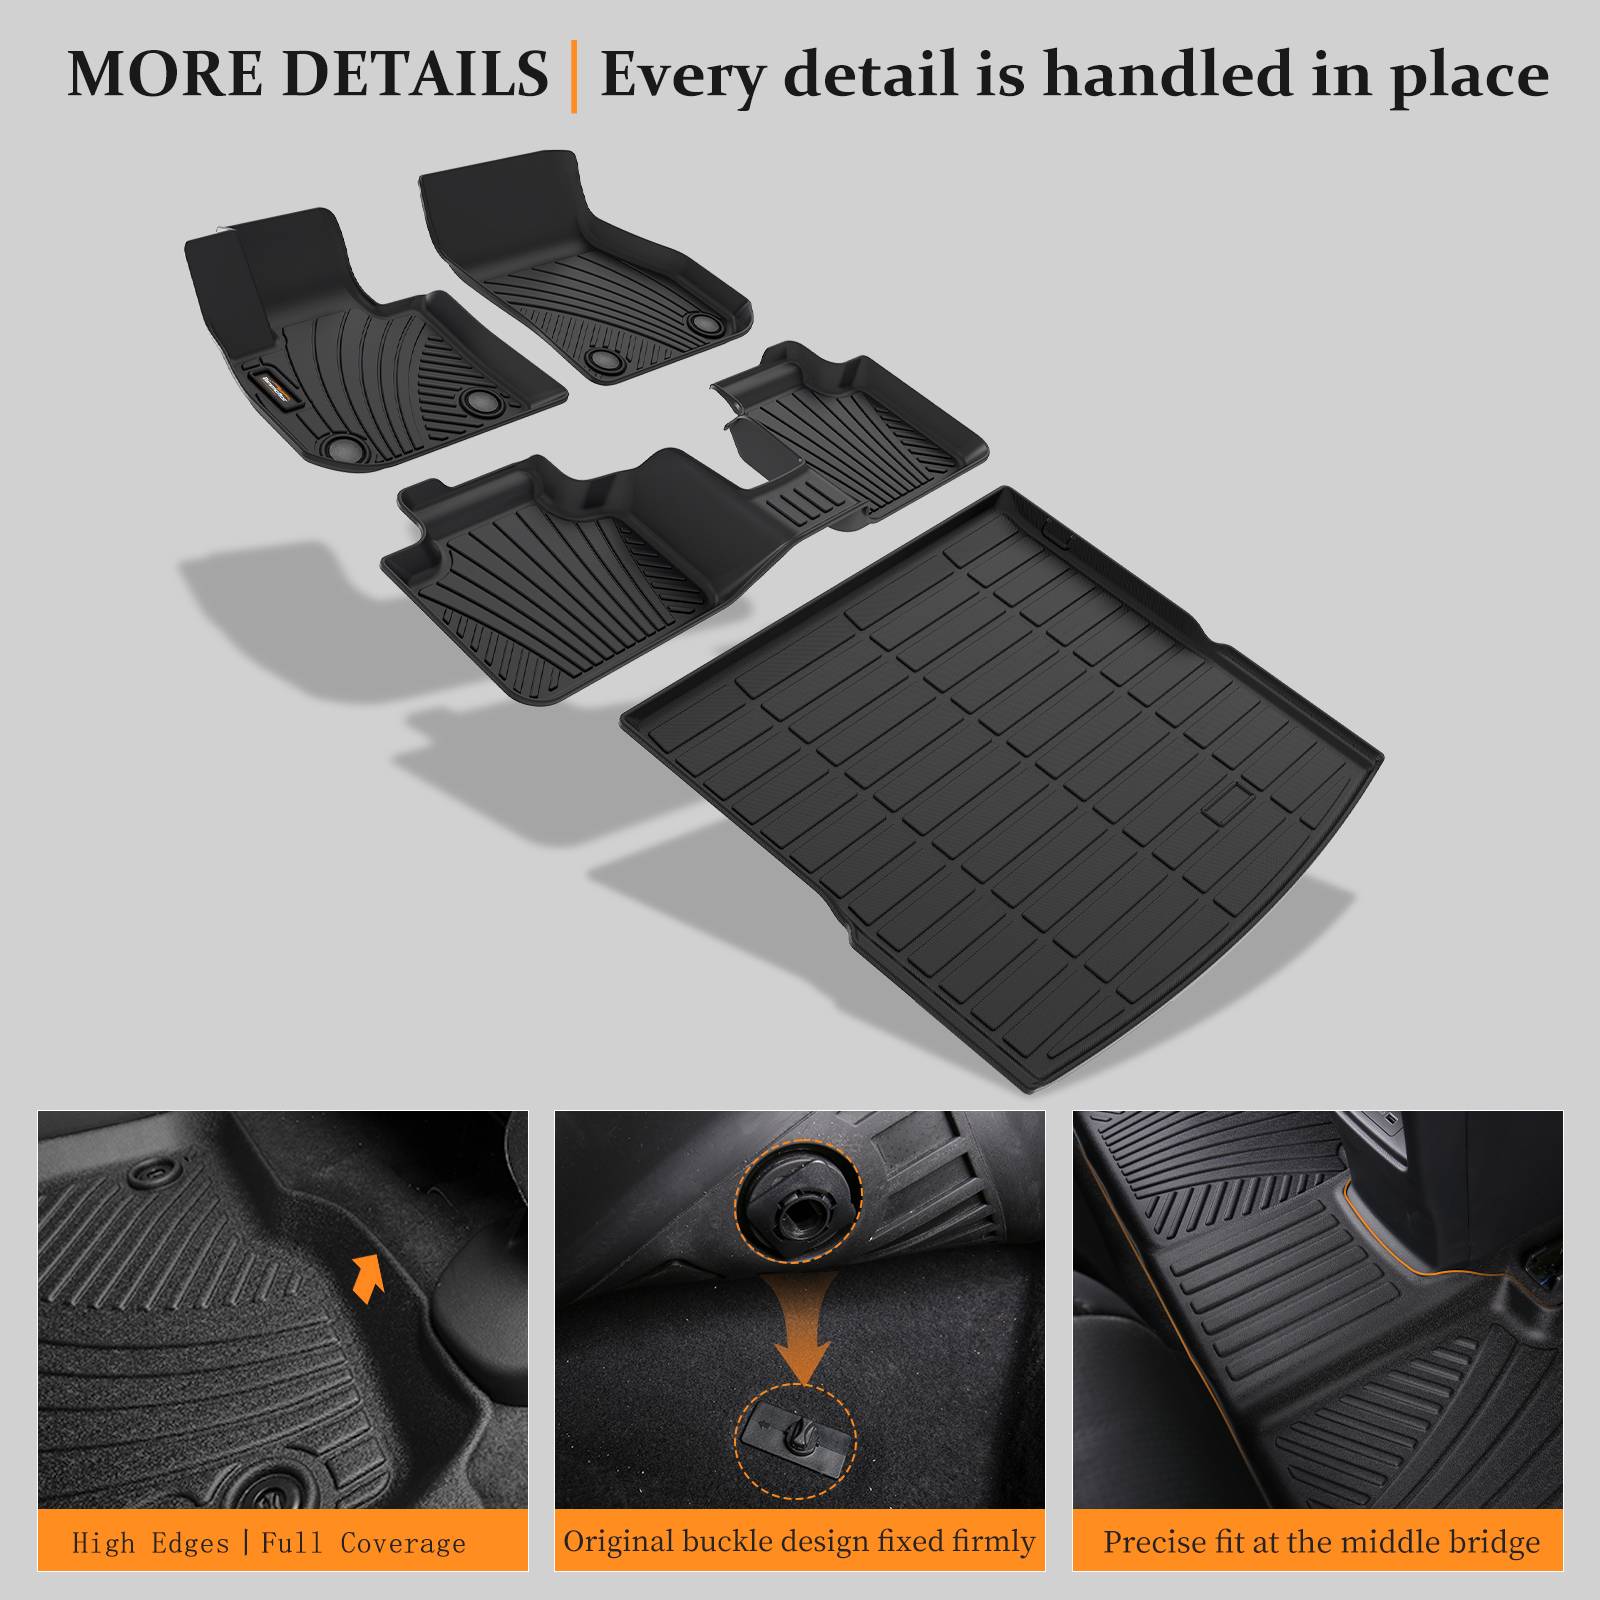 Binmotor-Floor Mats & Cargo Liner Set for Honda Civic 2022 2023 2024(Civic Sedan Only, Not for Hatchback) 丨2nd Row with USB Ports丨All Weather Car Floor Mats TPE Rubber, Car Accessories Floor Liners （compatible year 2022-2024）